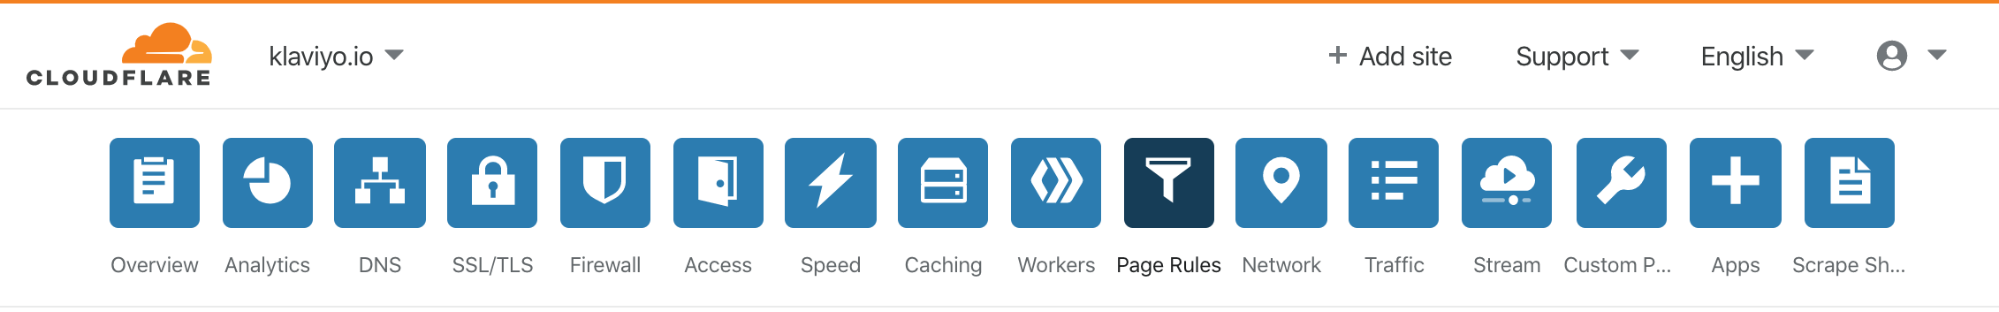 Inside Cloudflare, the top navigation with Page Rules icon selected.